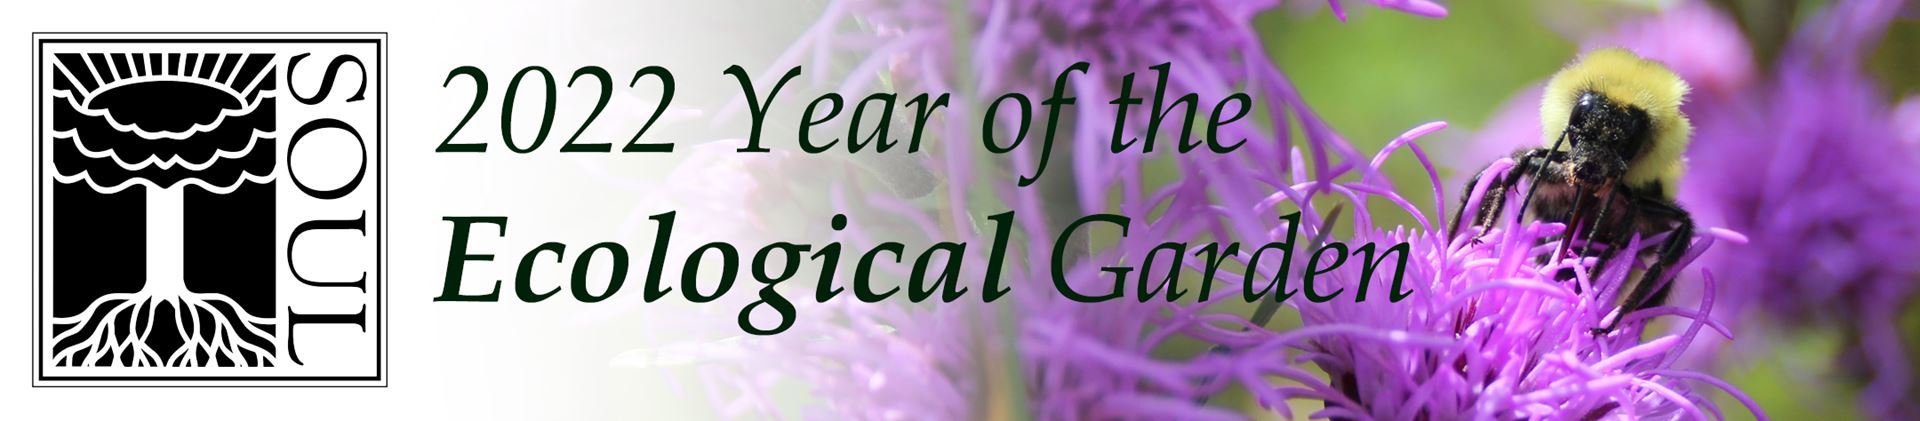 2022 Year of the Ecological Garden